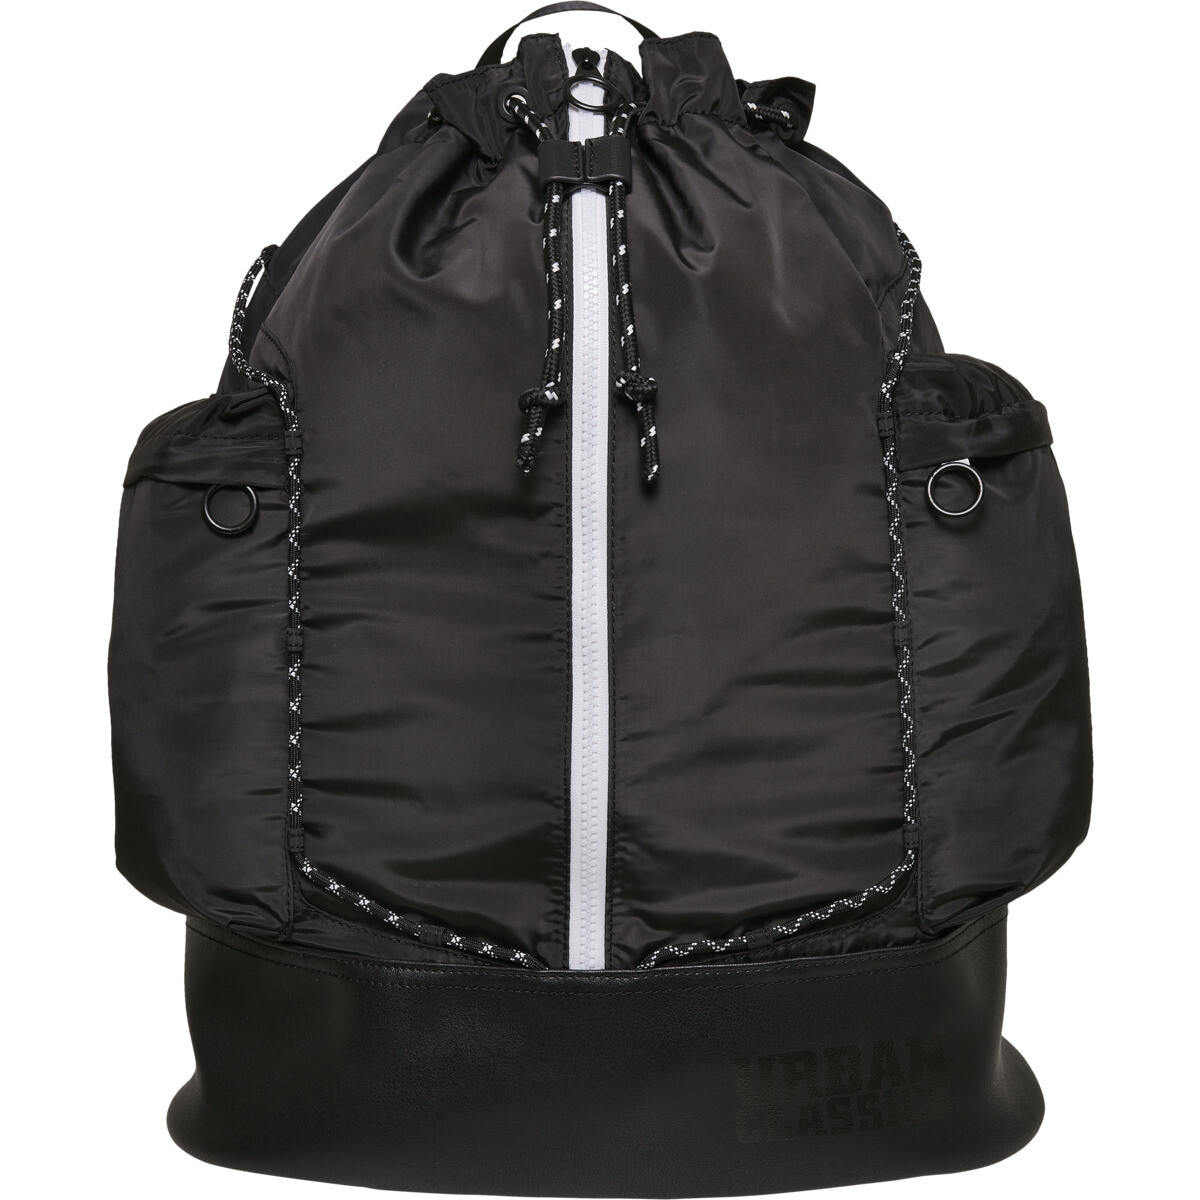 Light Weight Hiking Backpack